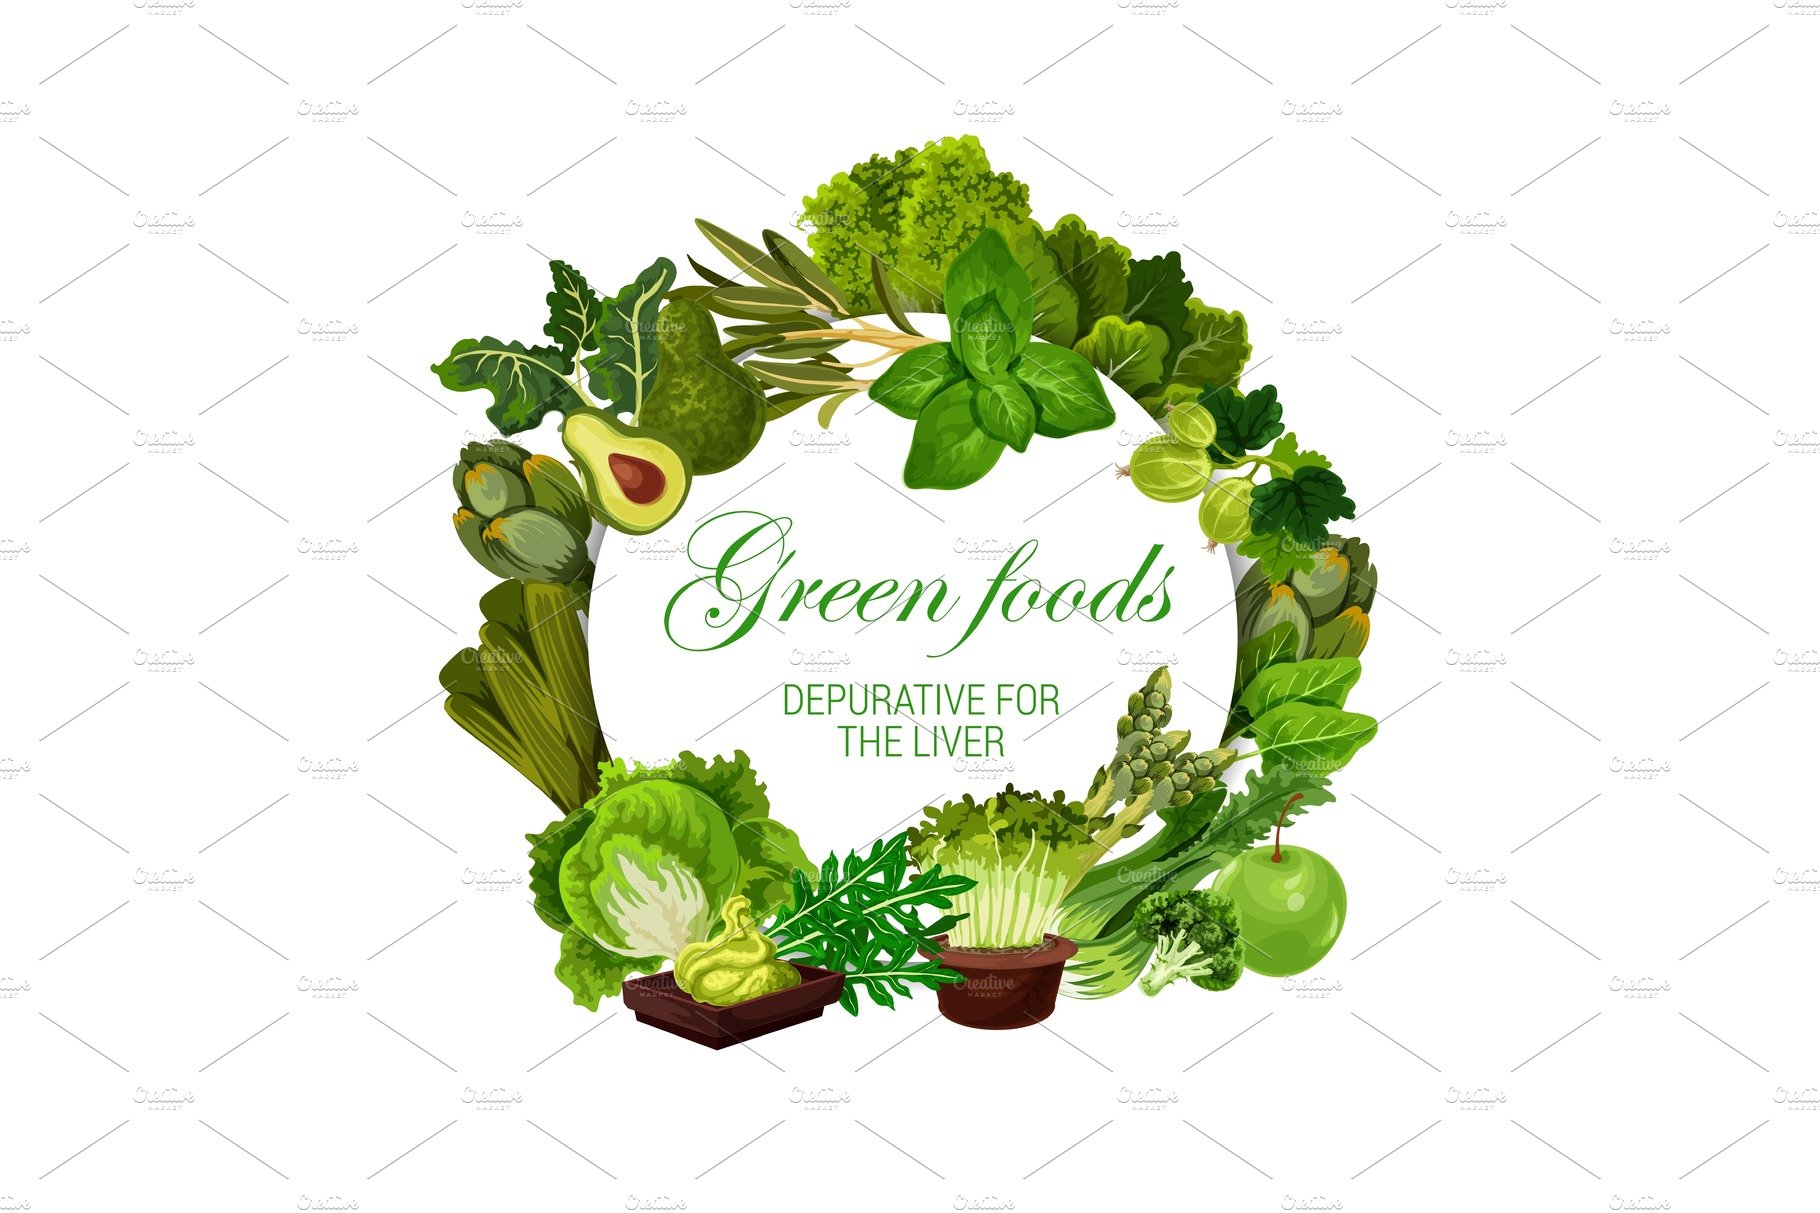 Color diet, green food cover image.